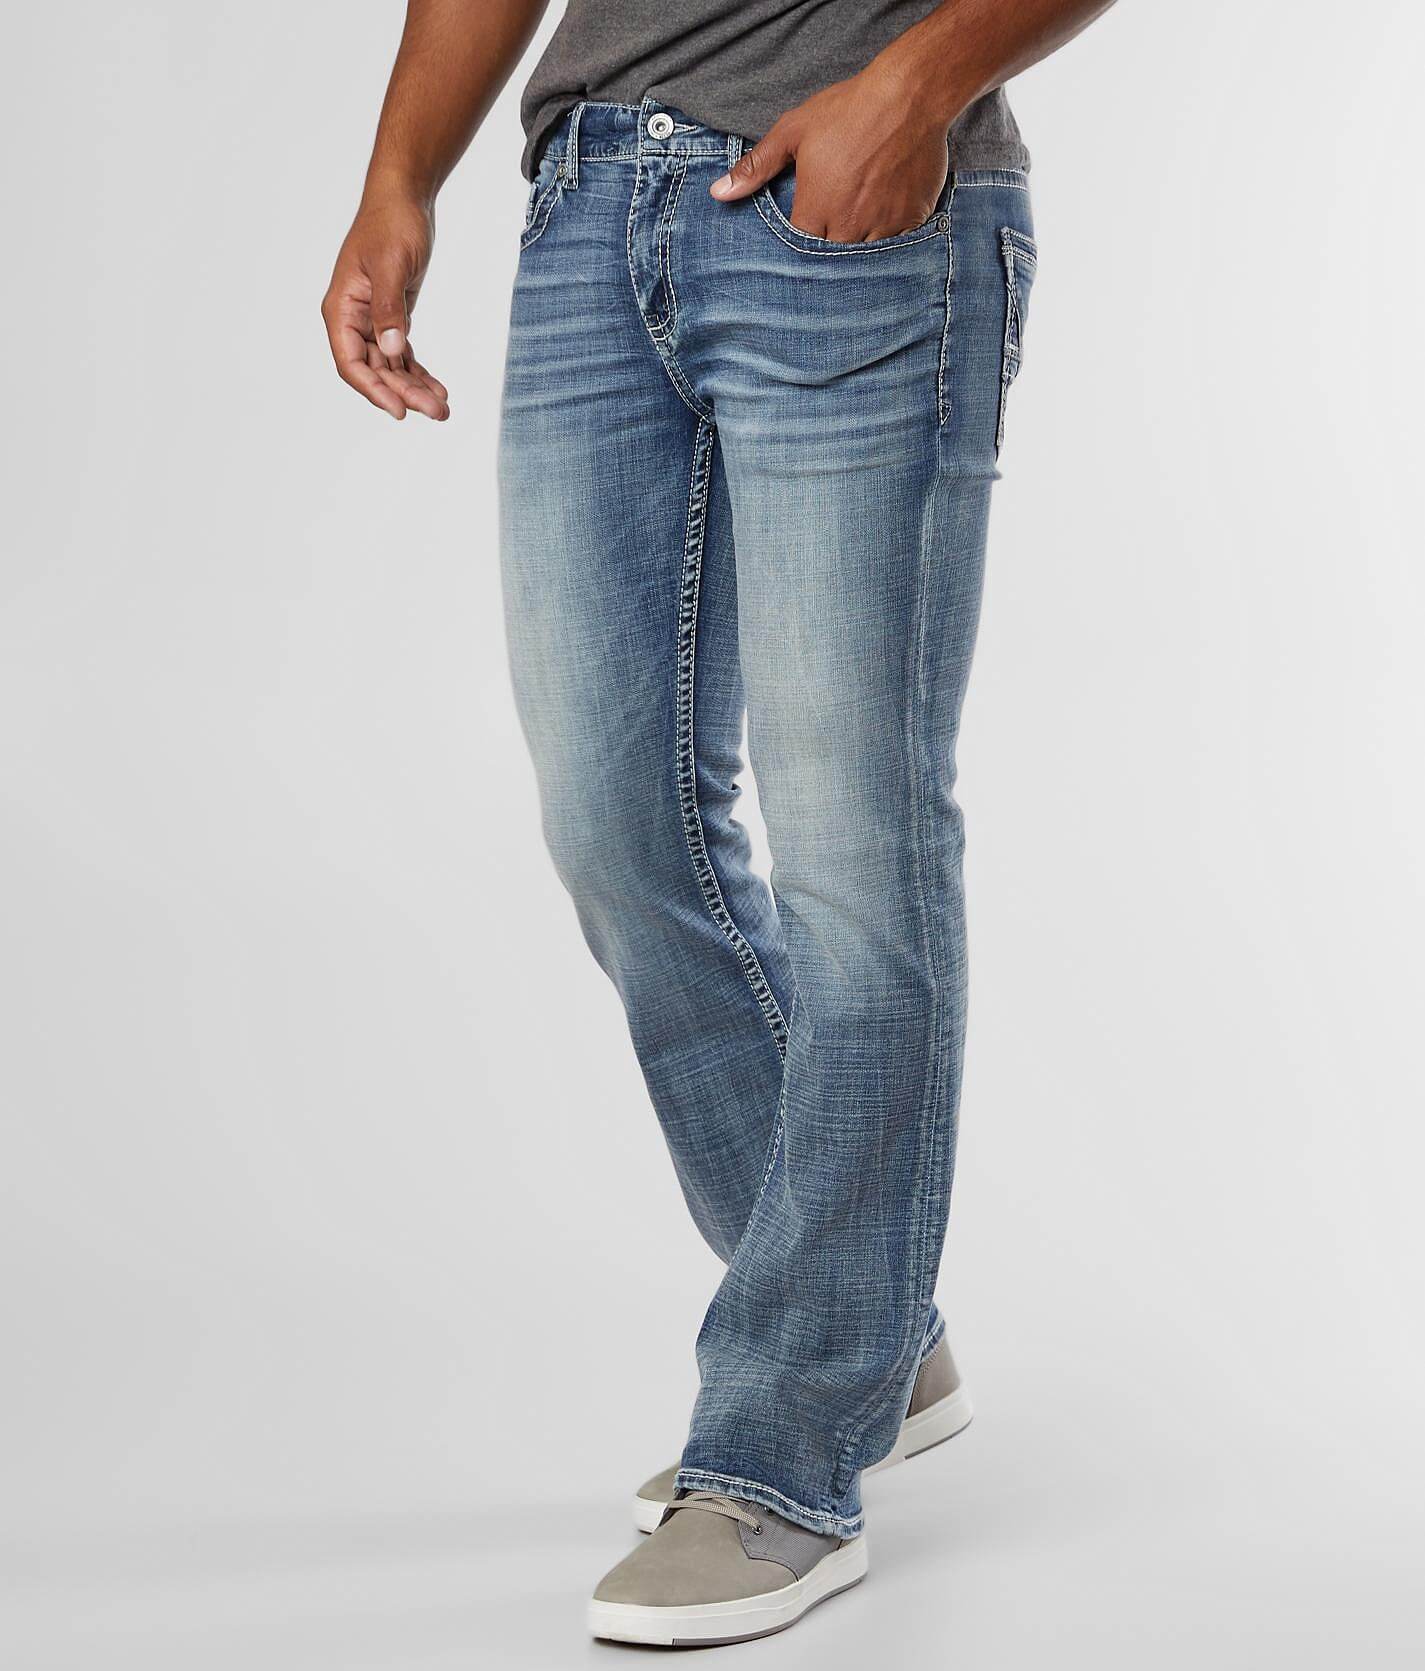 buckle aiden jeans